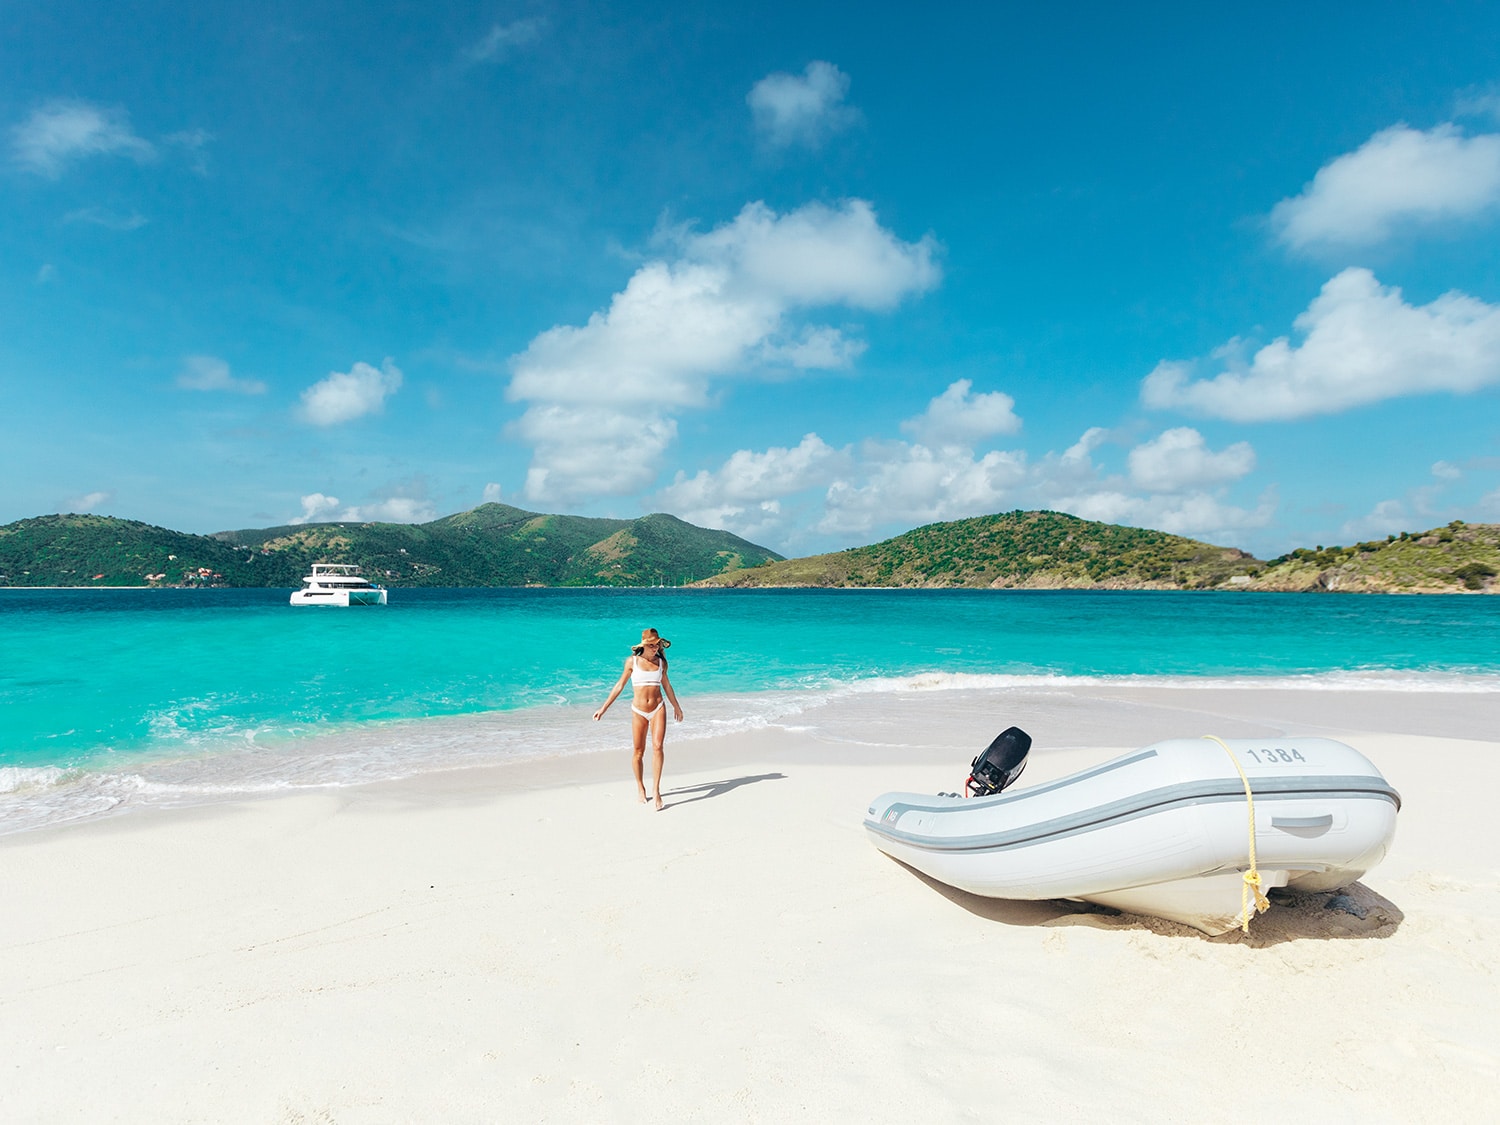 A beach excursion during a British Virgin Islands sailing with The Moorings.